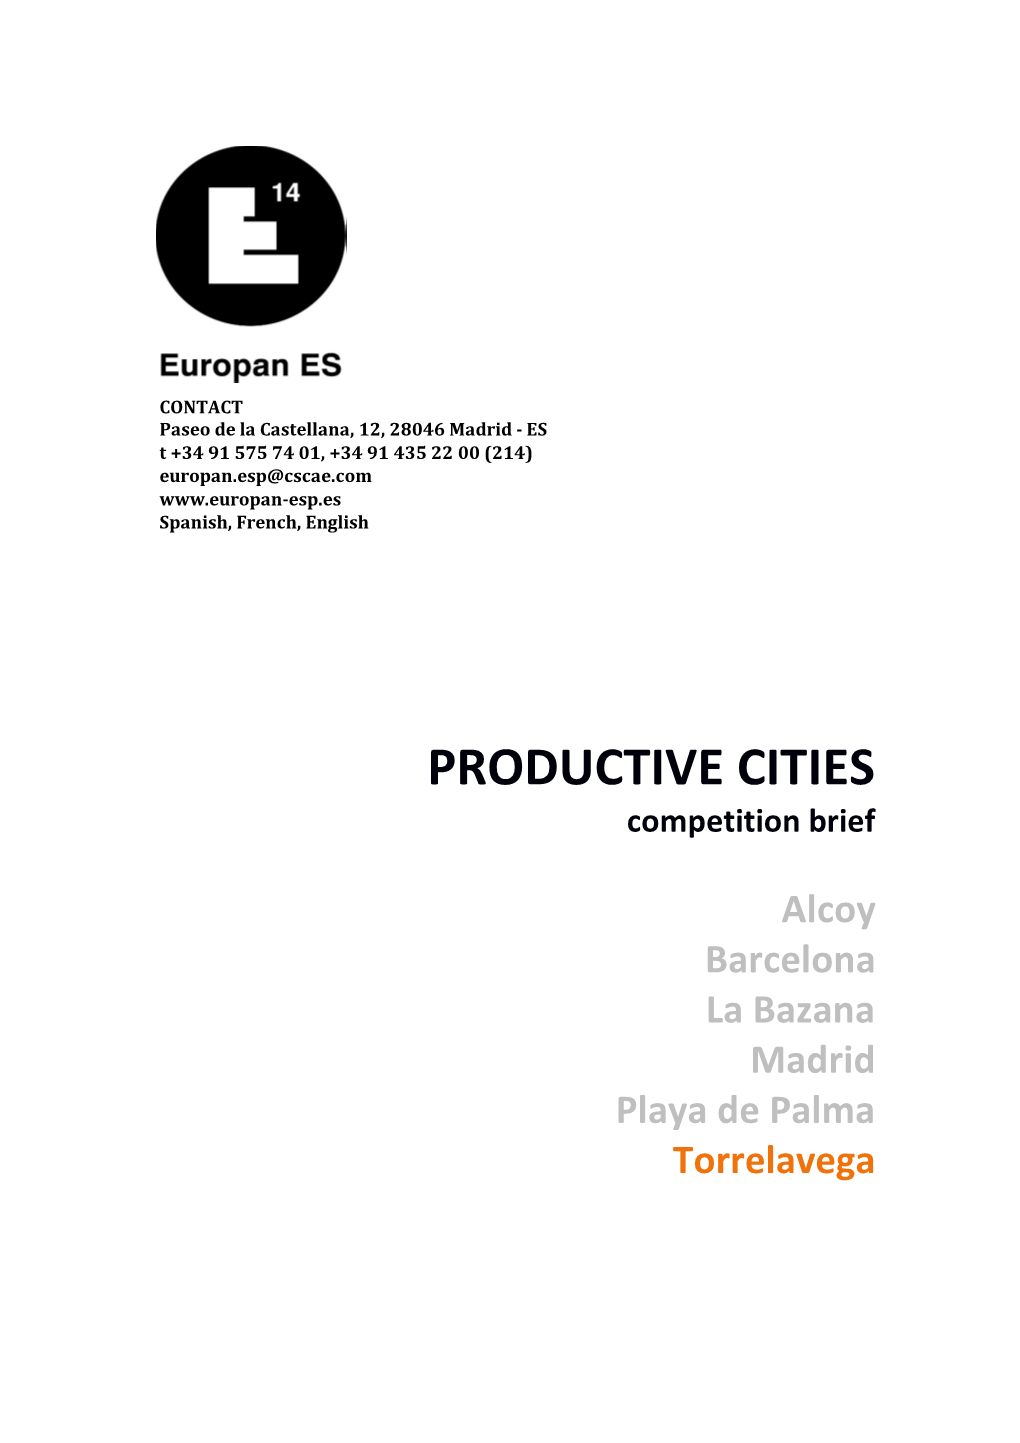 PRODUCTIVE CITIES Competition Brief